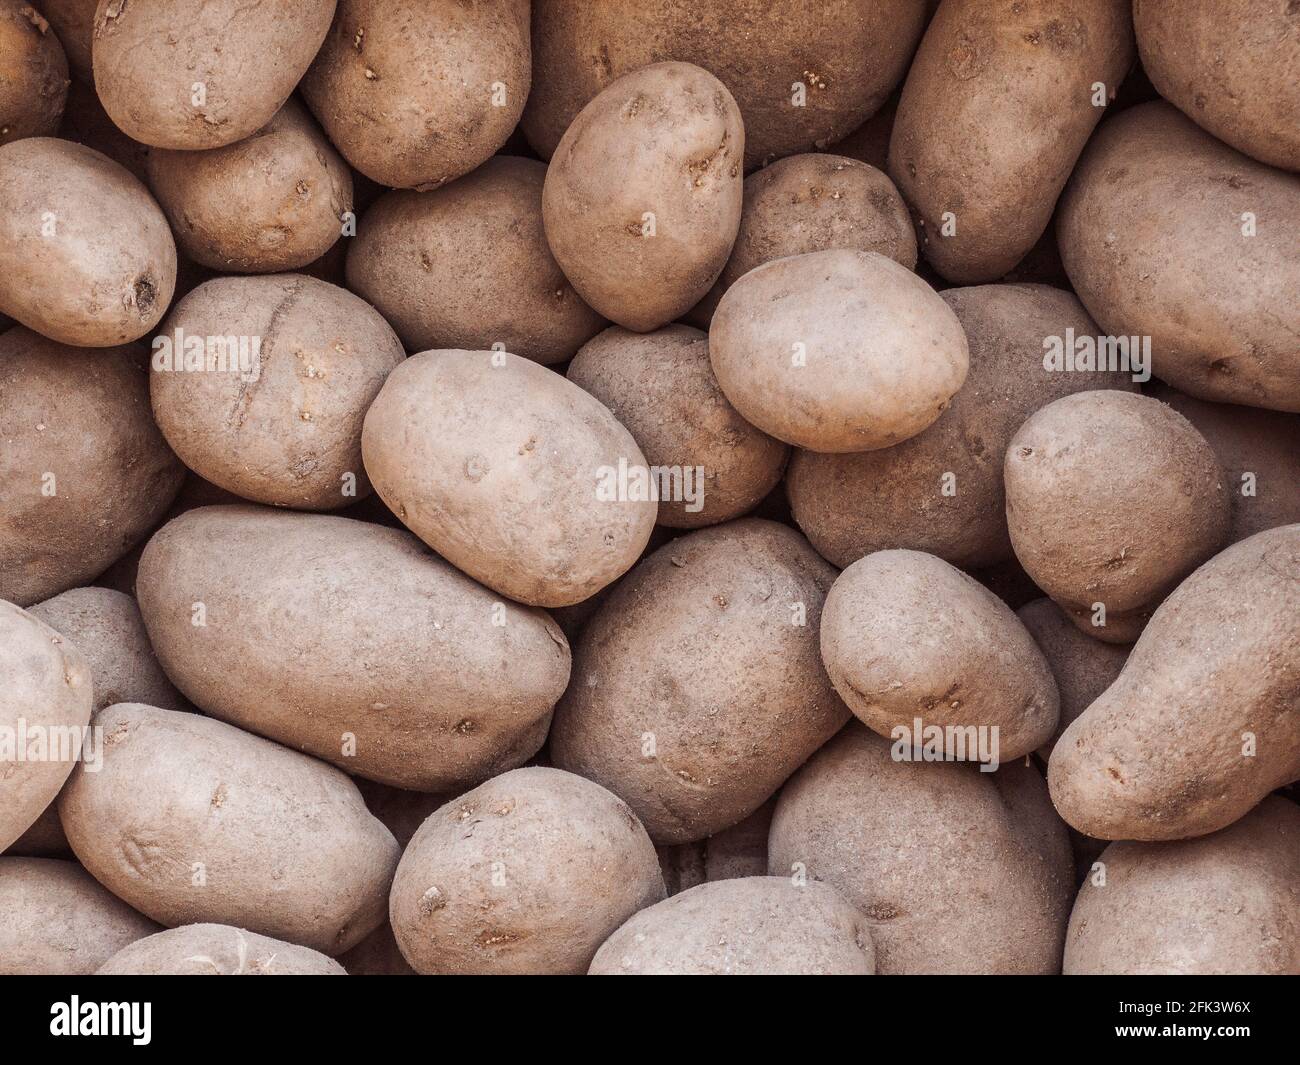 Monalisa potatoes filling the entire frame with copy space Stock Photo